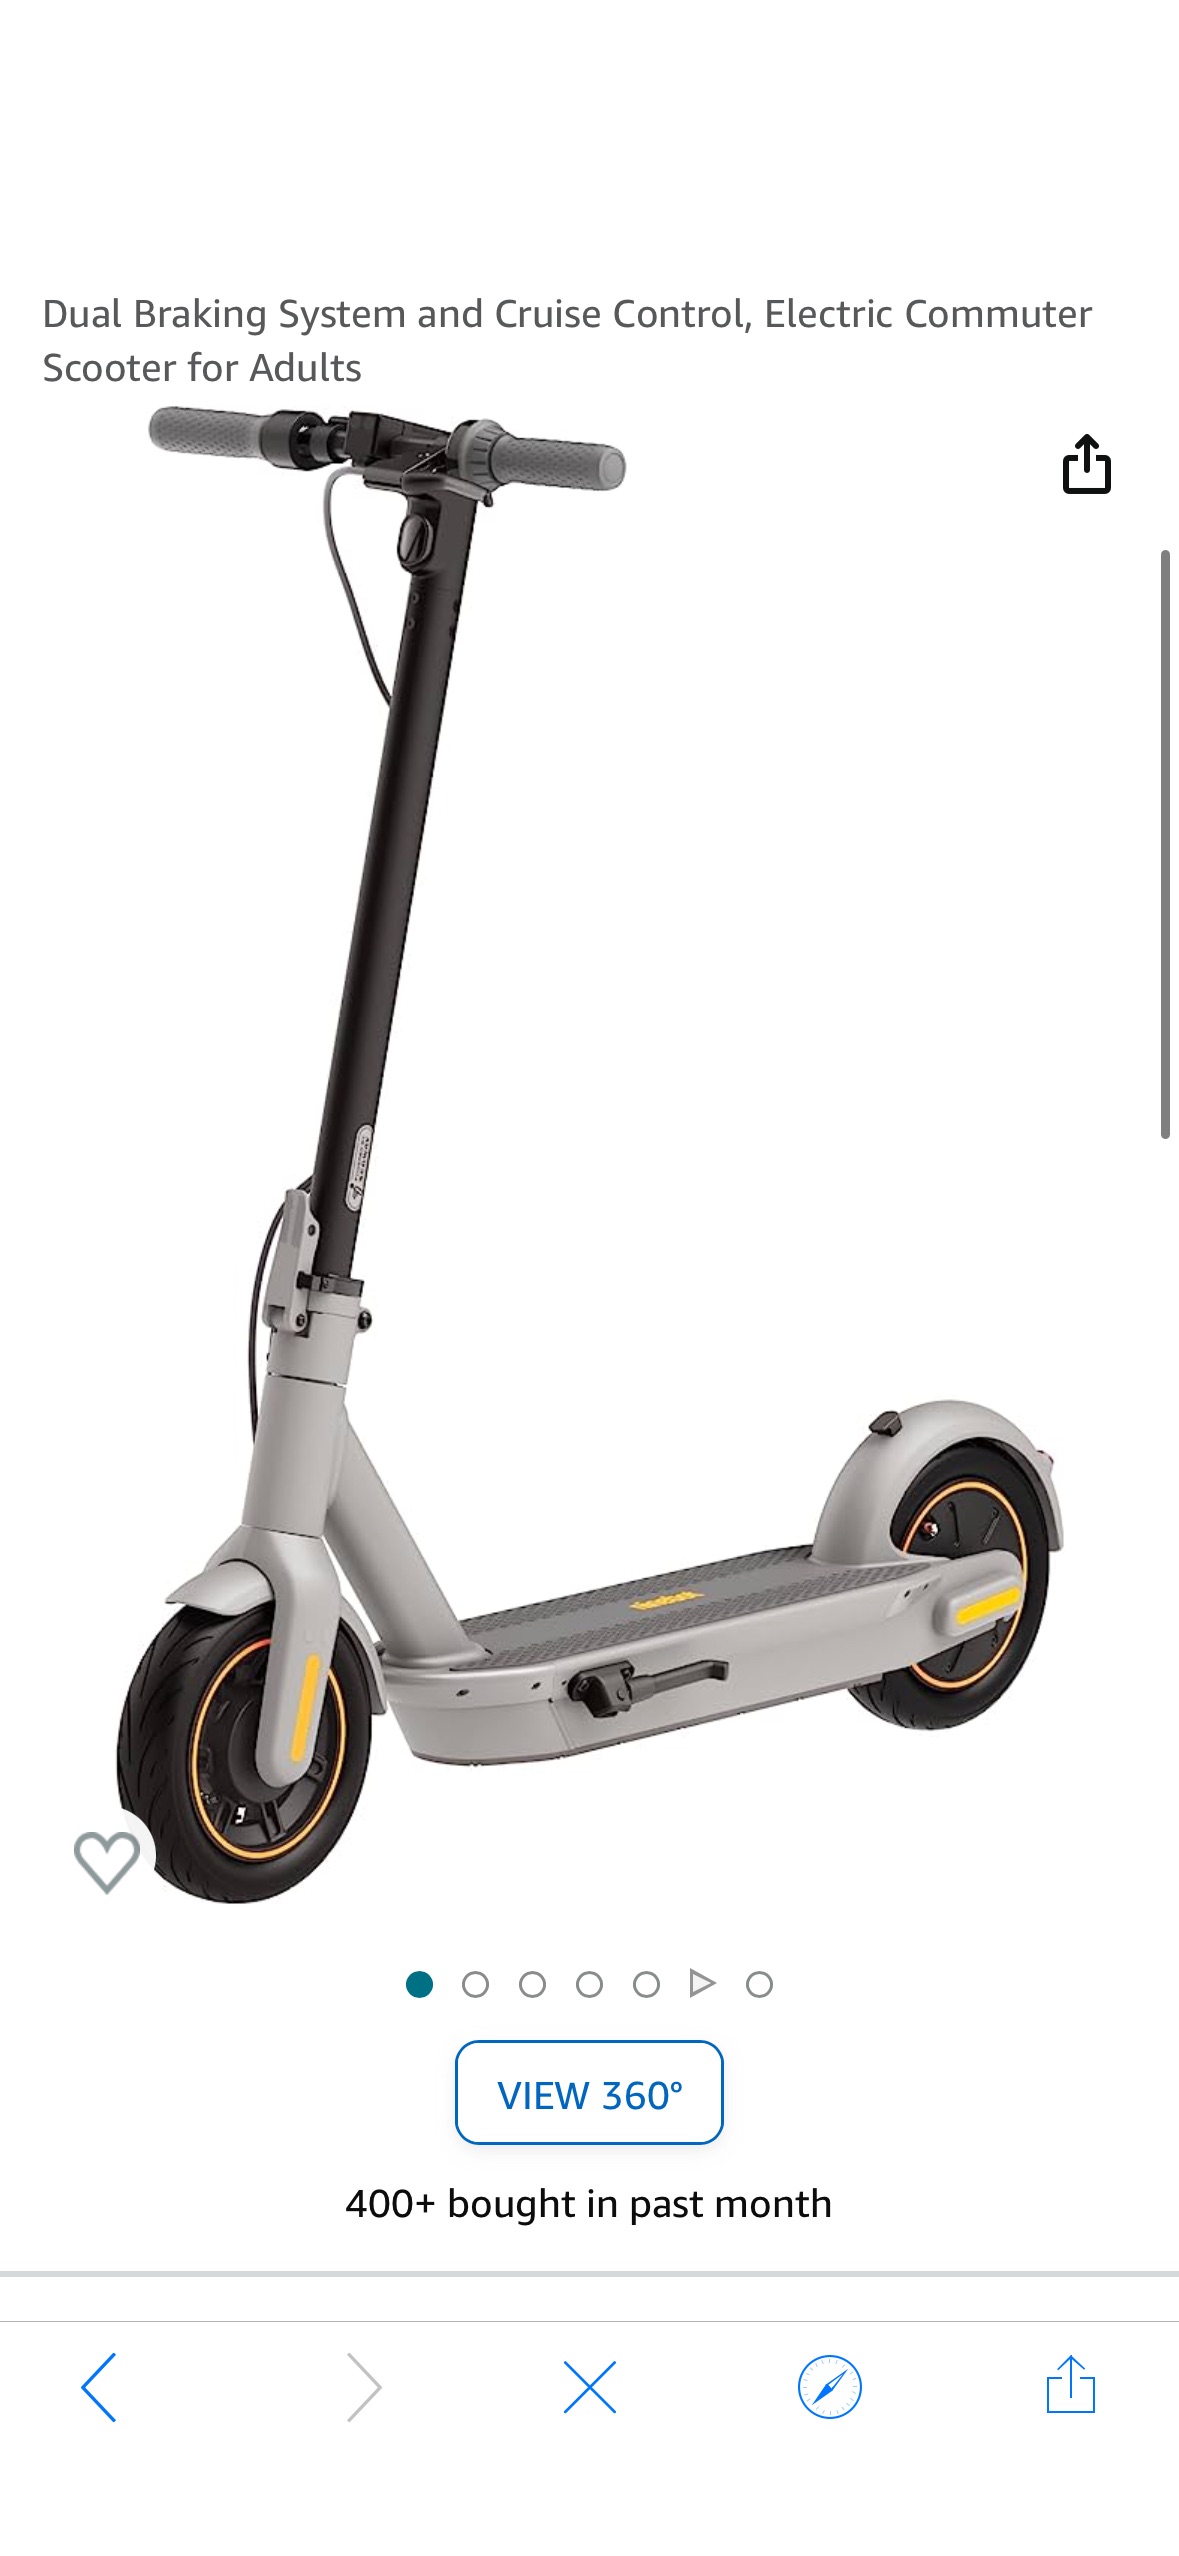 Amazon.com : Segway Ninebot MAX G30LP Electric Kick Scooter, Up to 25 Miles Long-range Battery, Max Speed 18.6 MPH, Lightweight and Foldable, Gray : Sports & Outdoors